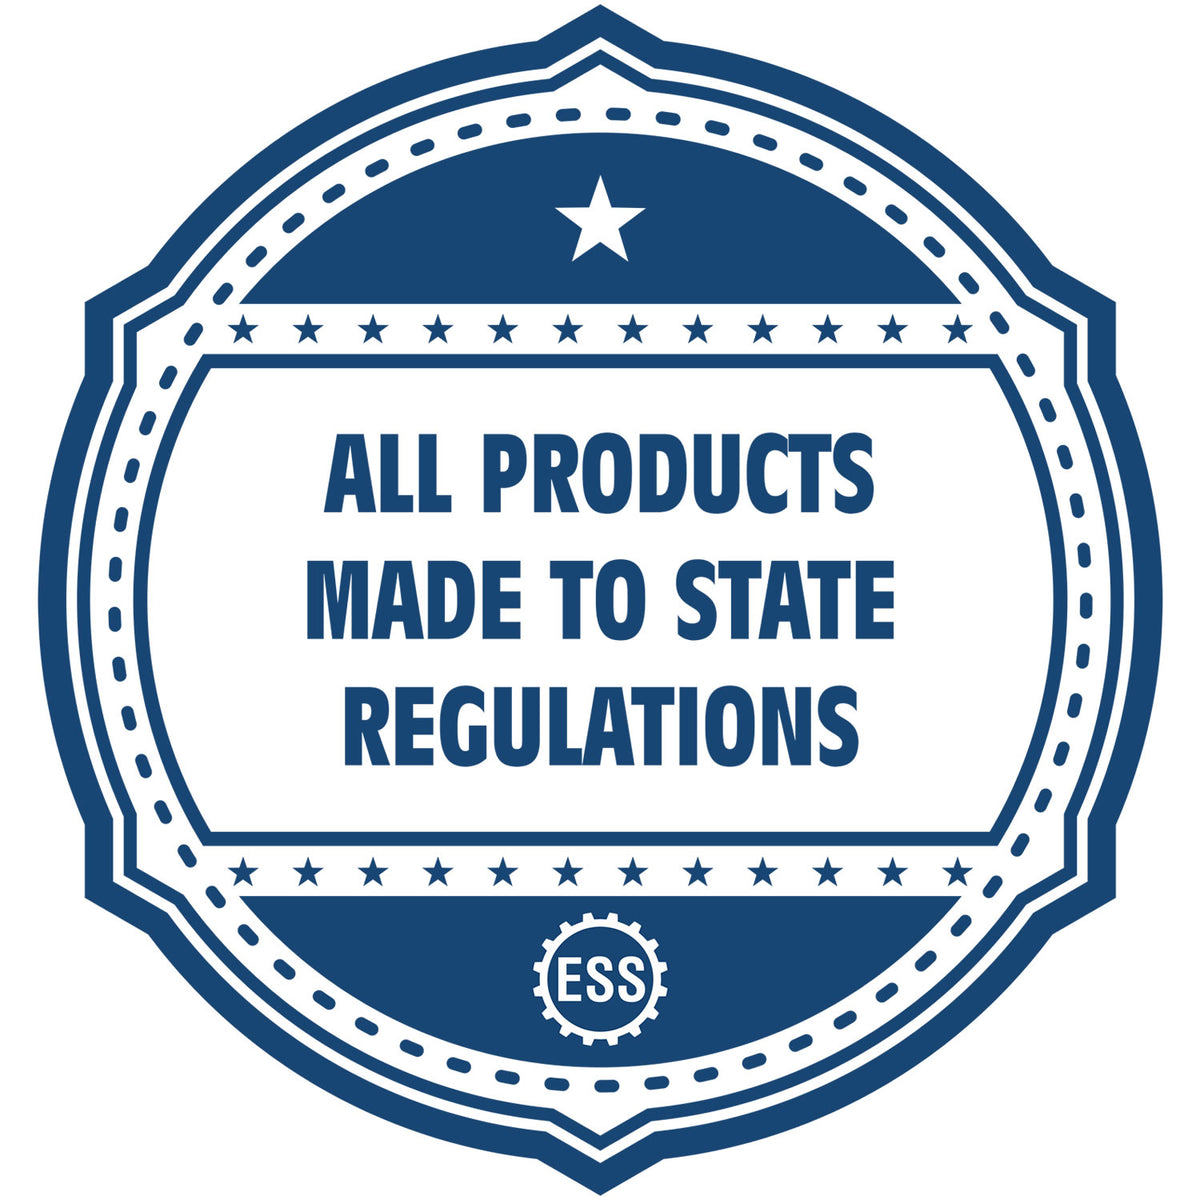 An icon or badge element for the Soft Texas Professional Engineer Seal showing that this product is made in compliance with state regulations.